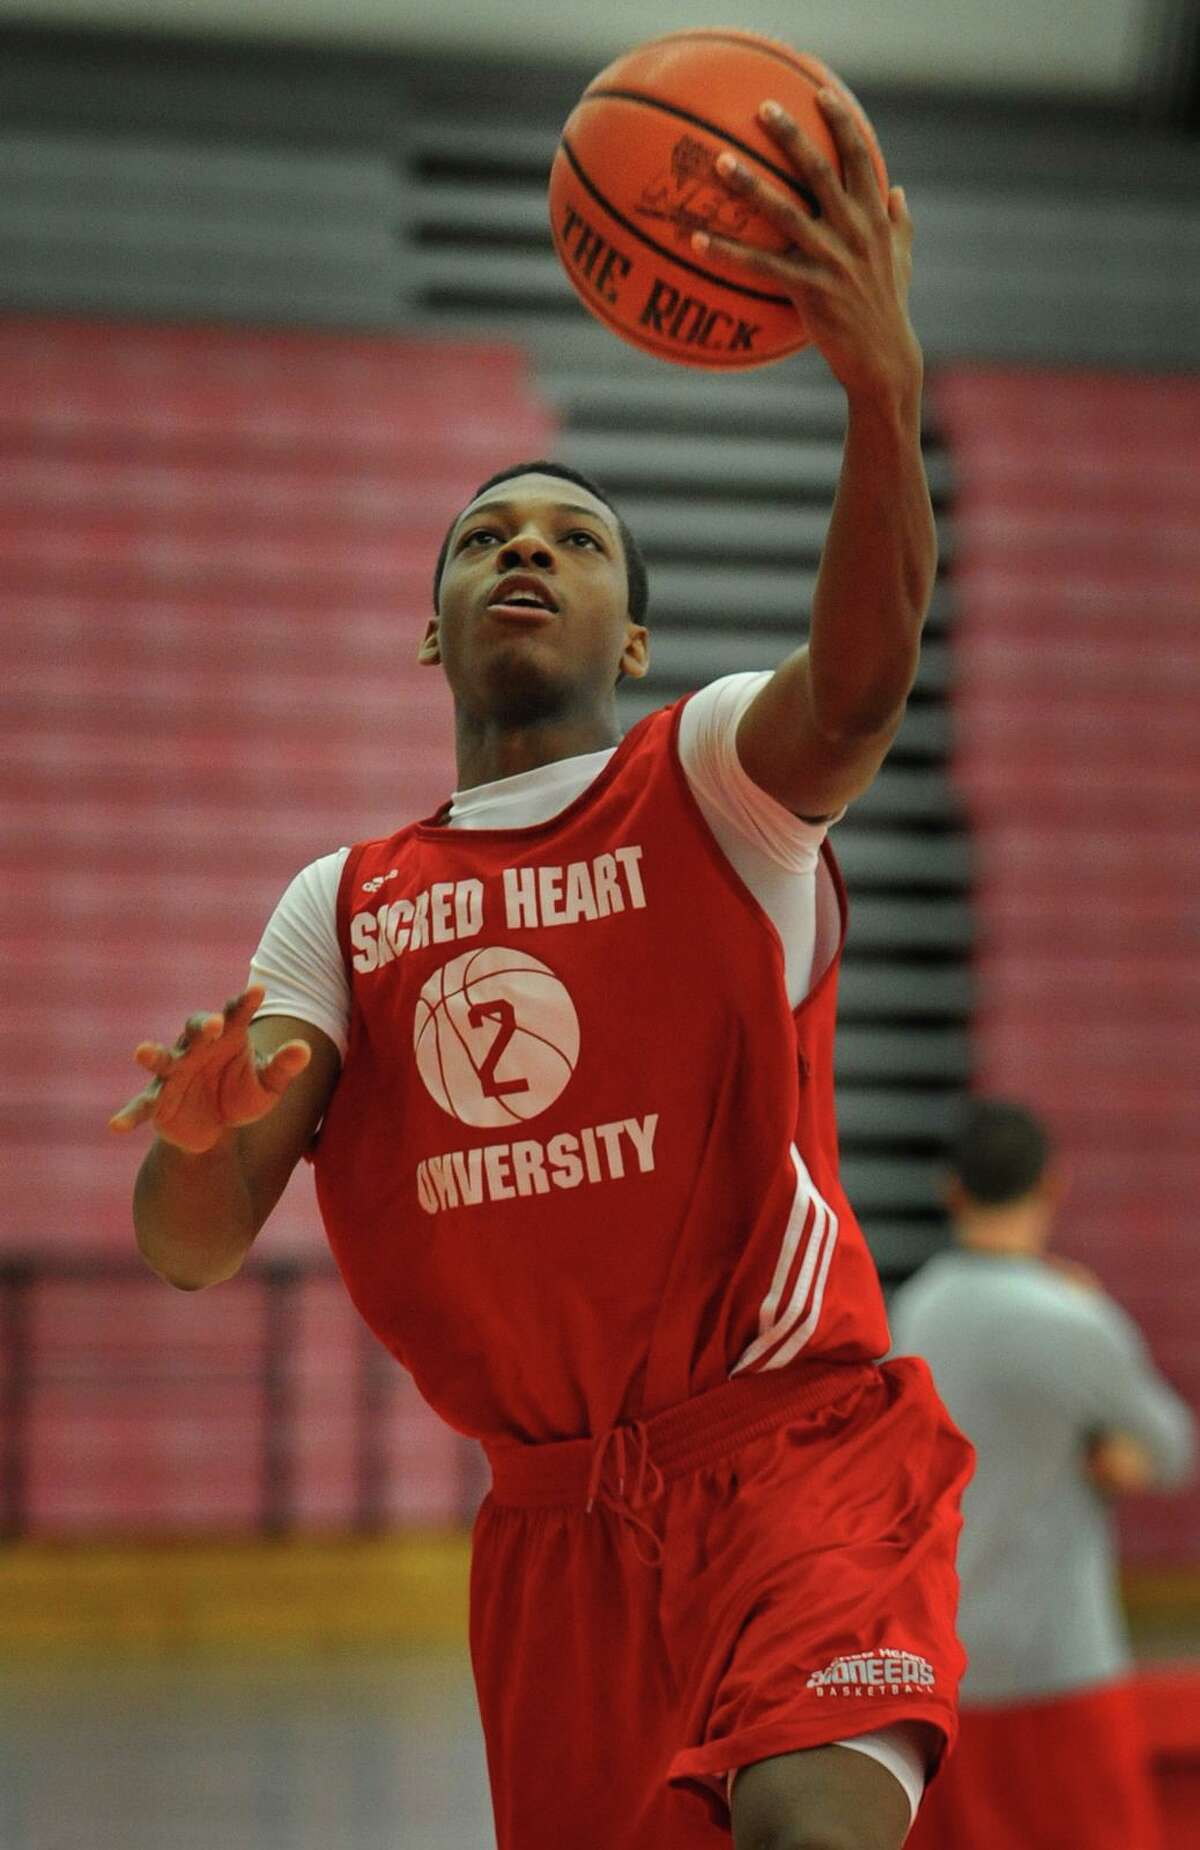 Sacred Heart University’s Evan Kelly of Norwalk drives in for a lay-up during basketball practice at the Pitt Center.